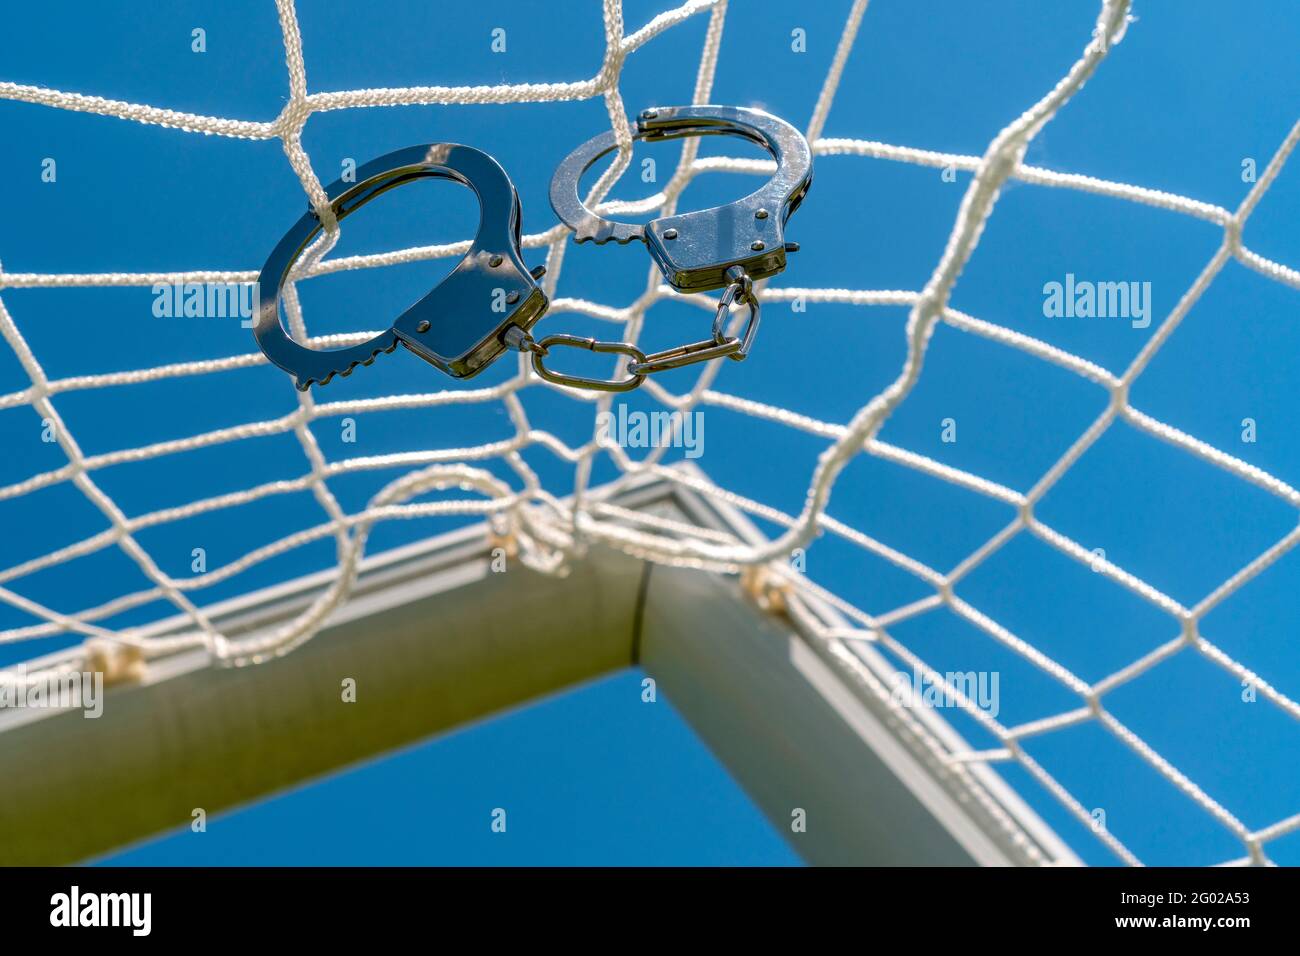 Scam with soccer or football gambling corruption. Handcuffs hanging on the net of a football goals Stock Photo